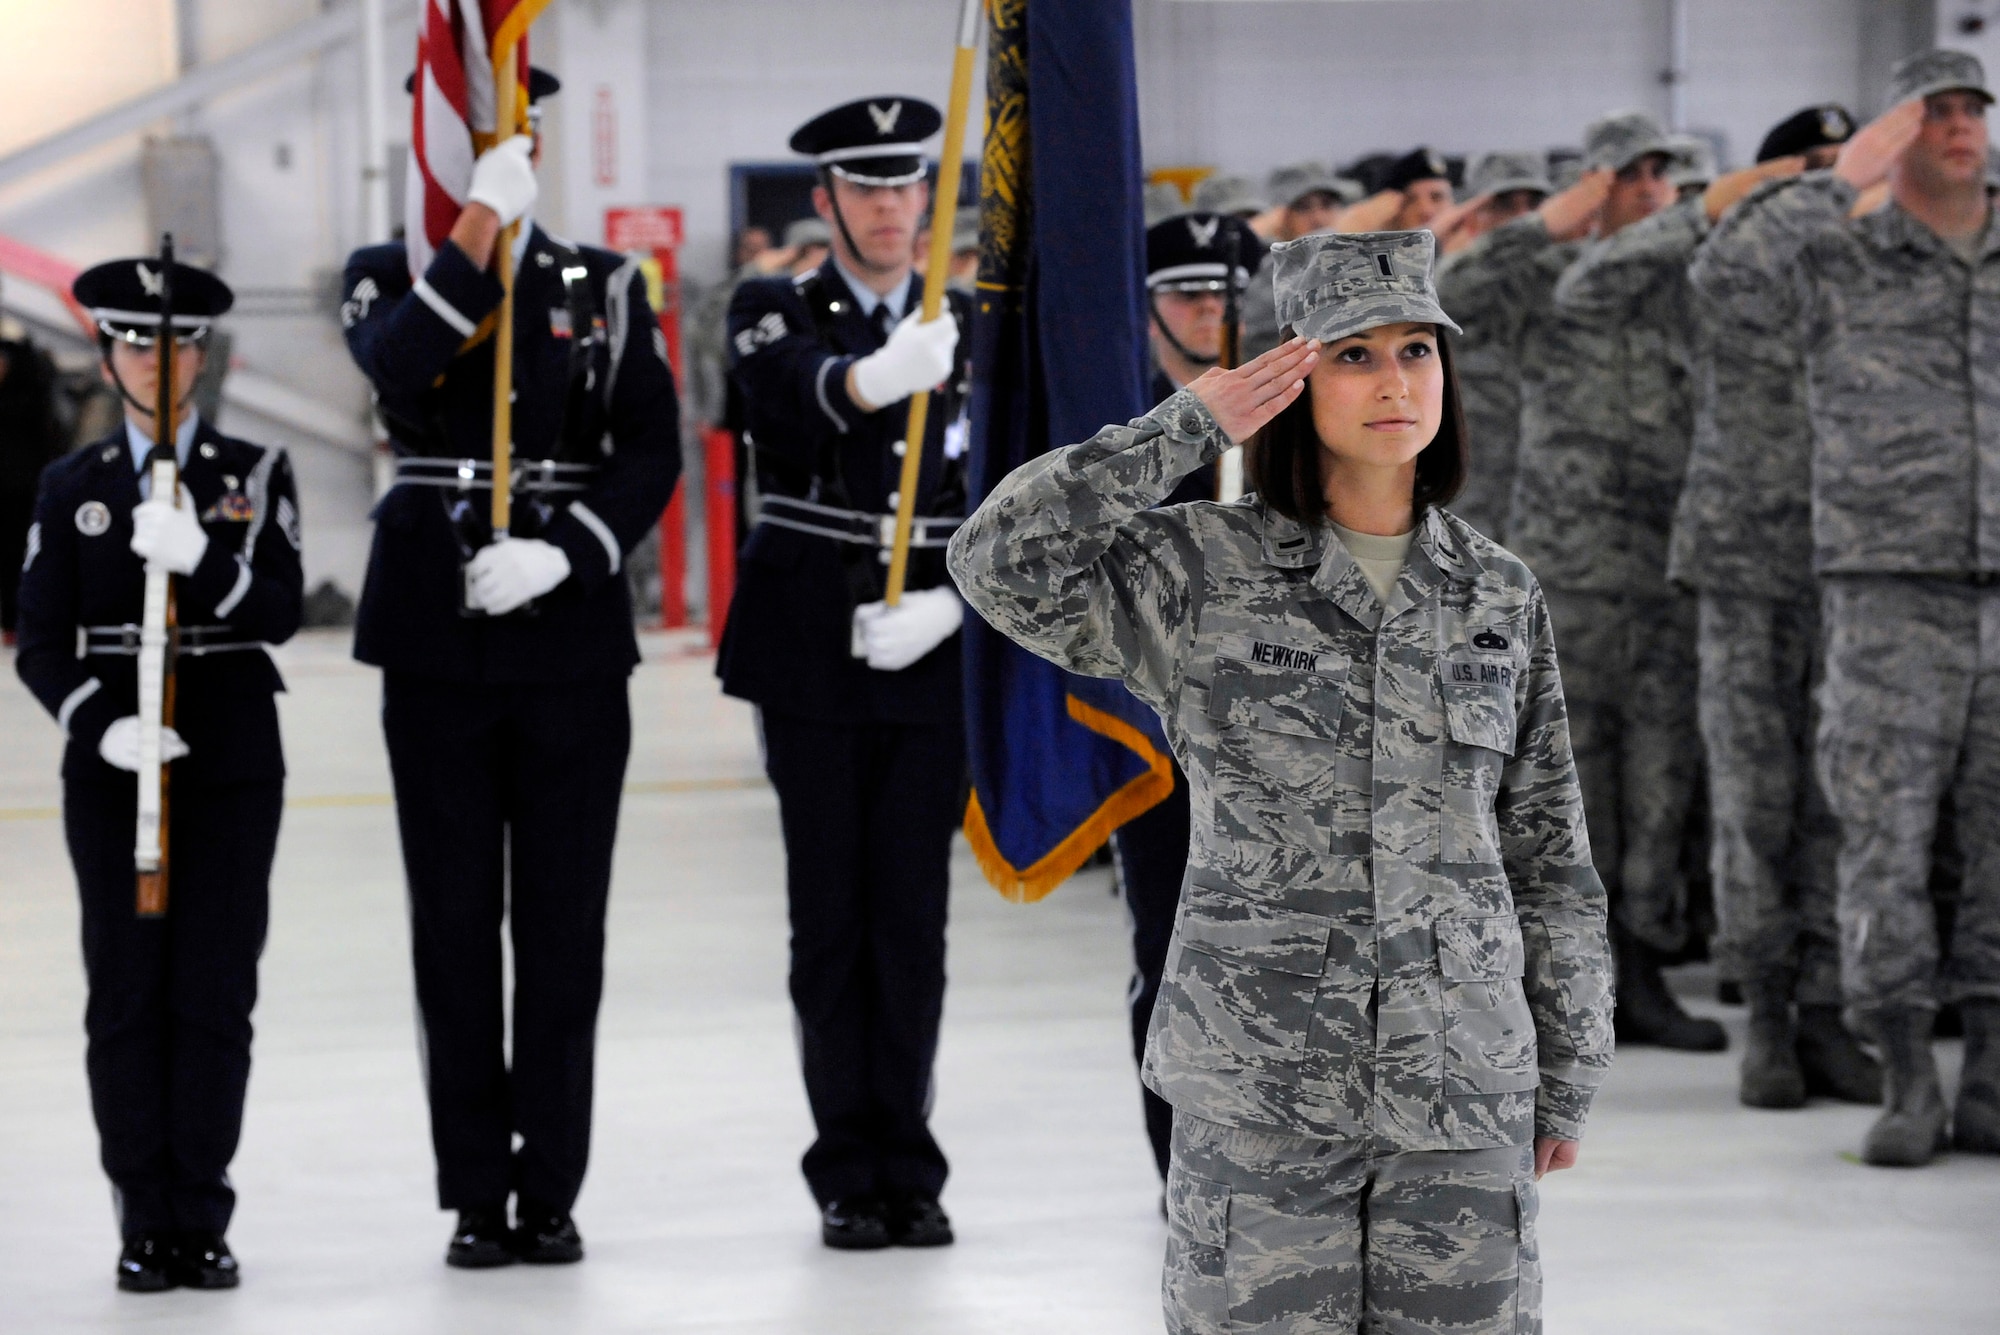 The Adjutant of ceremony, 1st Lt. Amy Newkirk, assigned to the 142nd Fighter Wing maintenance group, salutes the command during the Change of Command ceremony held Feb. 7, 2015, Portland Air National Guard Base, Ore. Col. Paul T. Fitzgerald assumed command of the wing as Col. Richard W. Wedan who retired after more than 27 years of service in the U.S. Air Force. (U.S. Air National Guard photo by Tech. Sgt. John Hughel, 142nd Fighter Wing Public Affairs) 